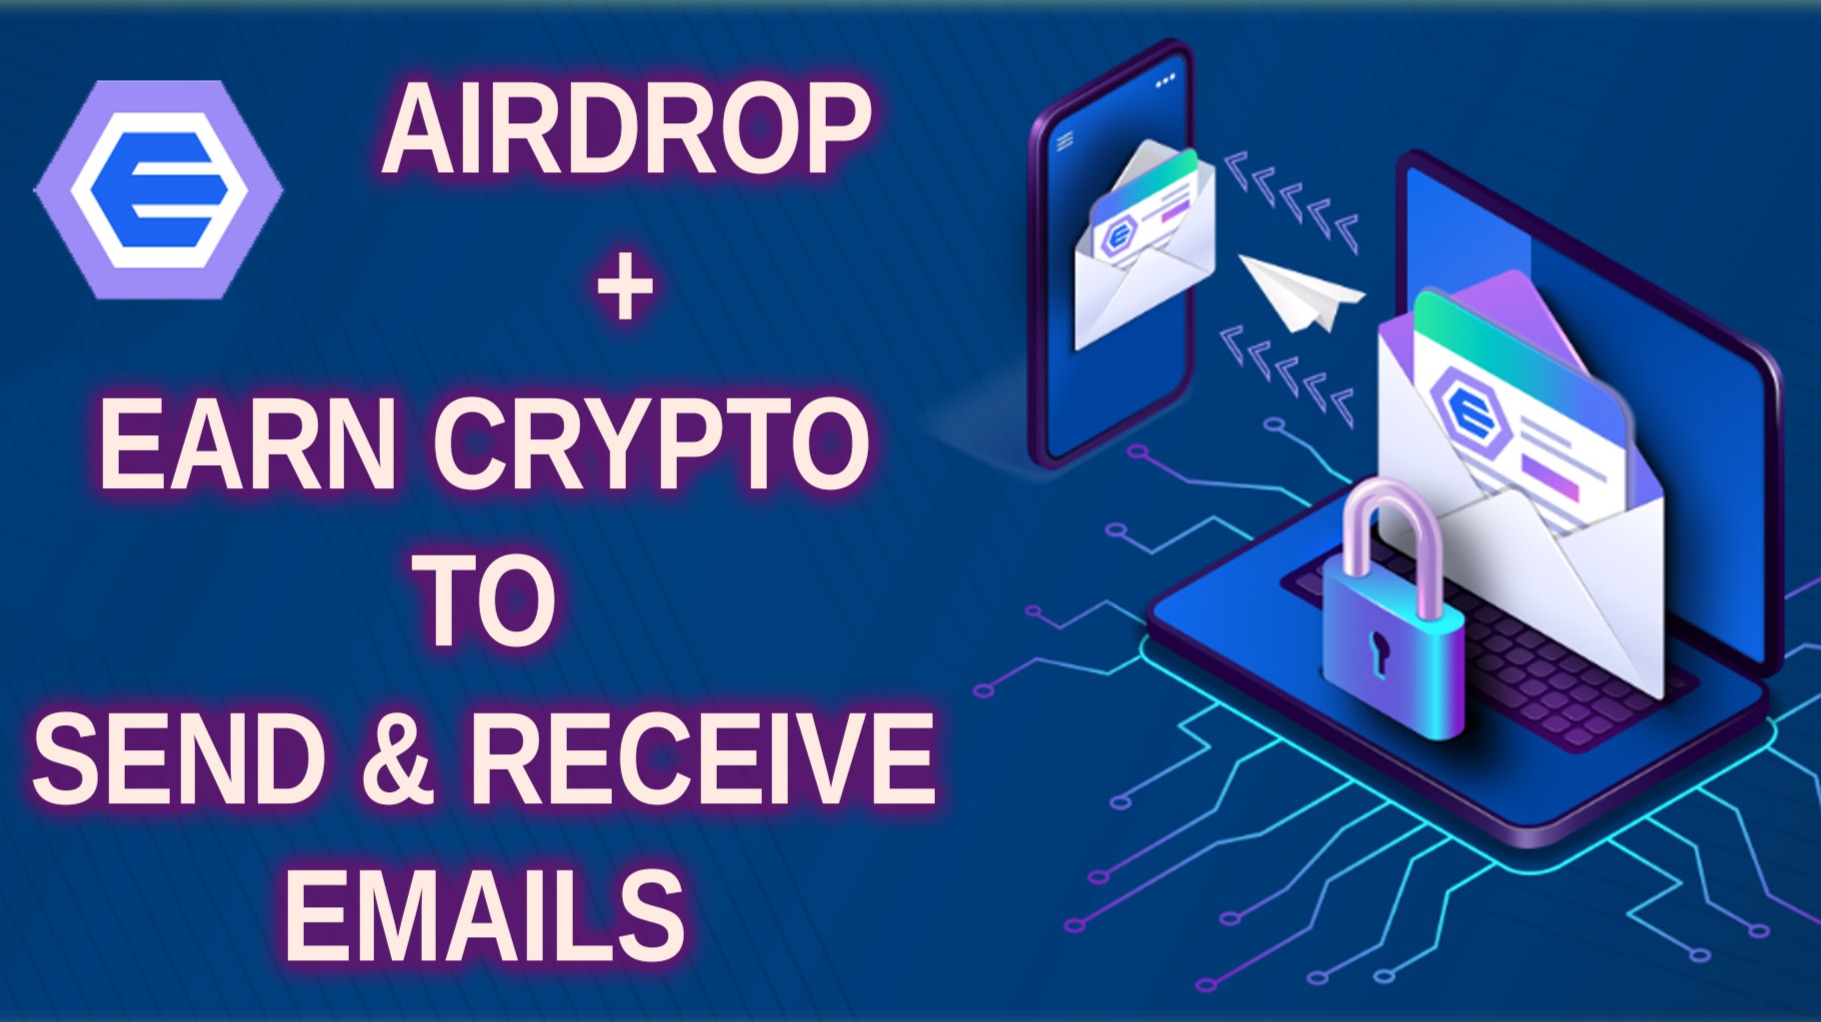 Ethermail Airdrop Guide | BULB